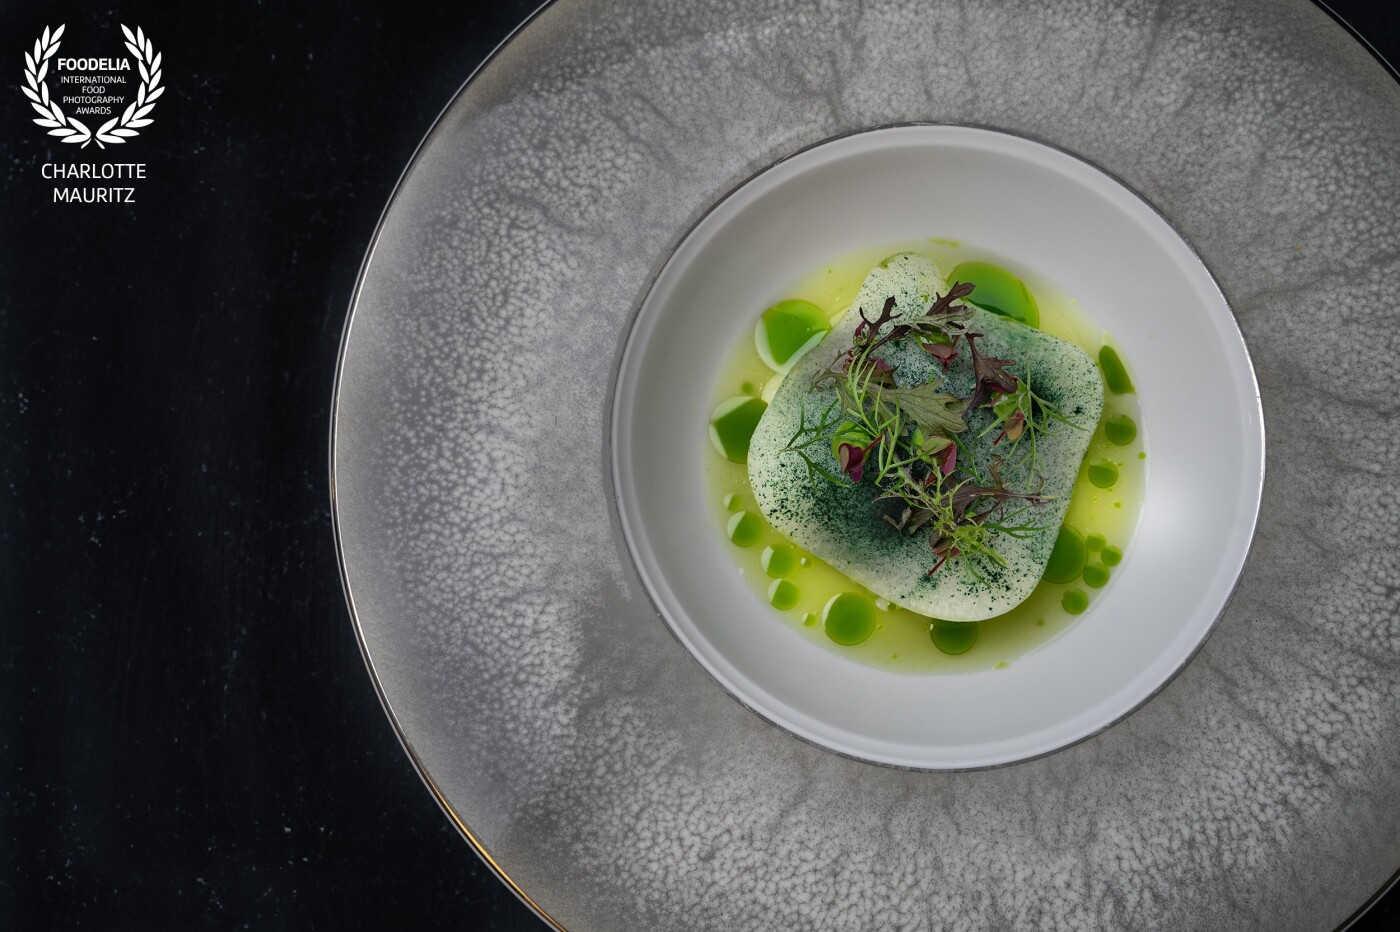 This dish is part of the new fall 2022 menu from high-end caterer Famous Flavours in the Netherlands. Chef Jasper Gronert made this beautiful dish. Mullet | Curry | Kohlrabi | Jalapeño